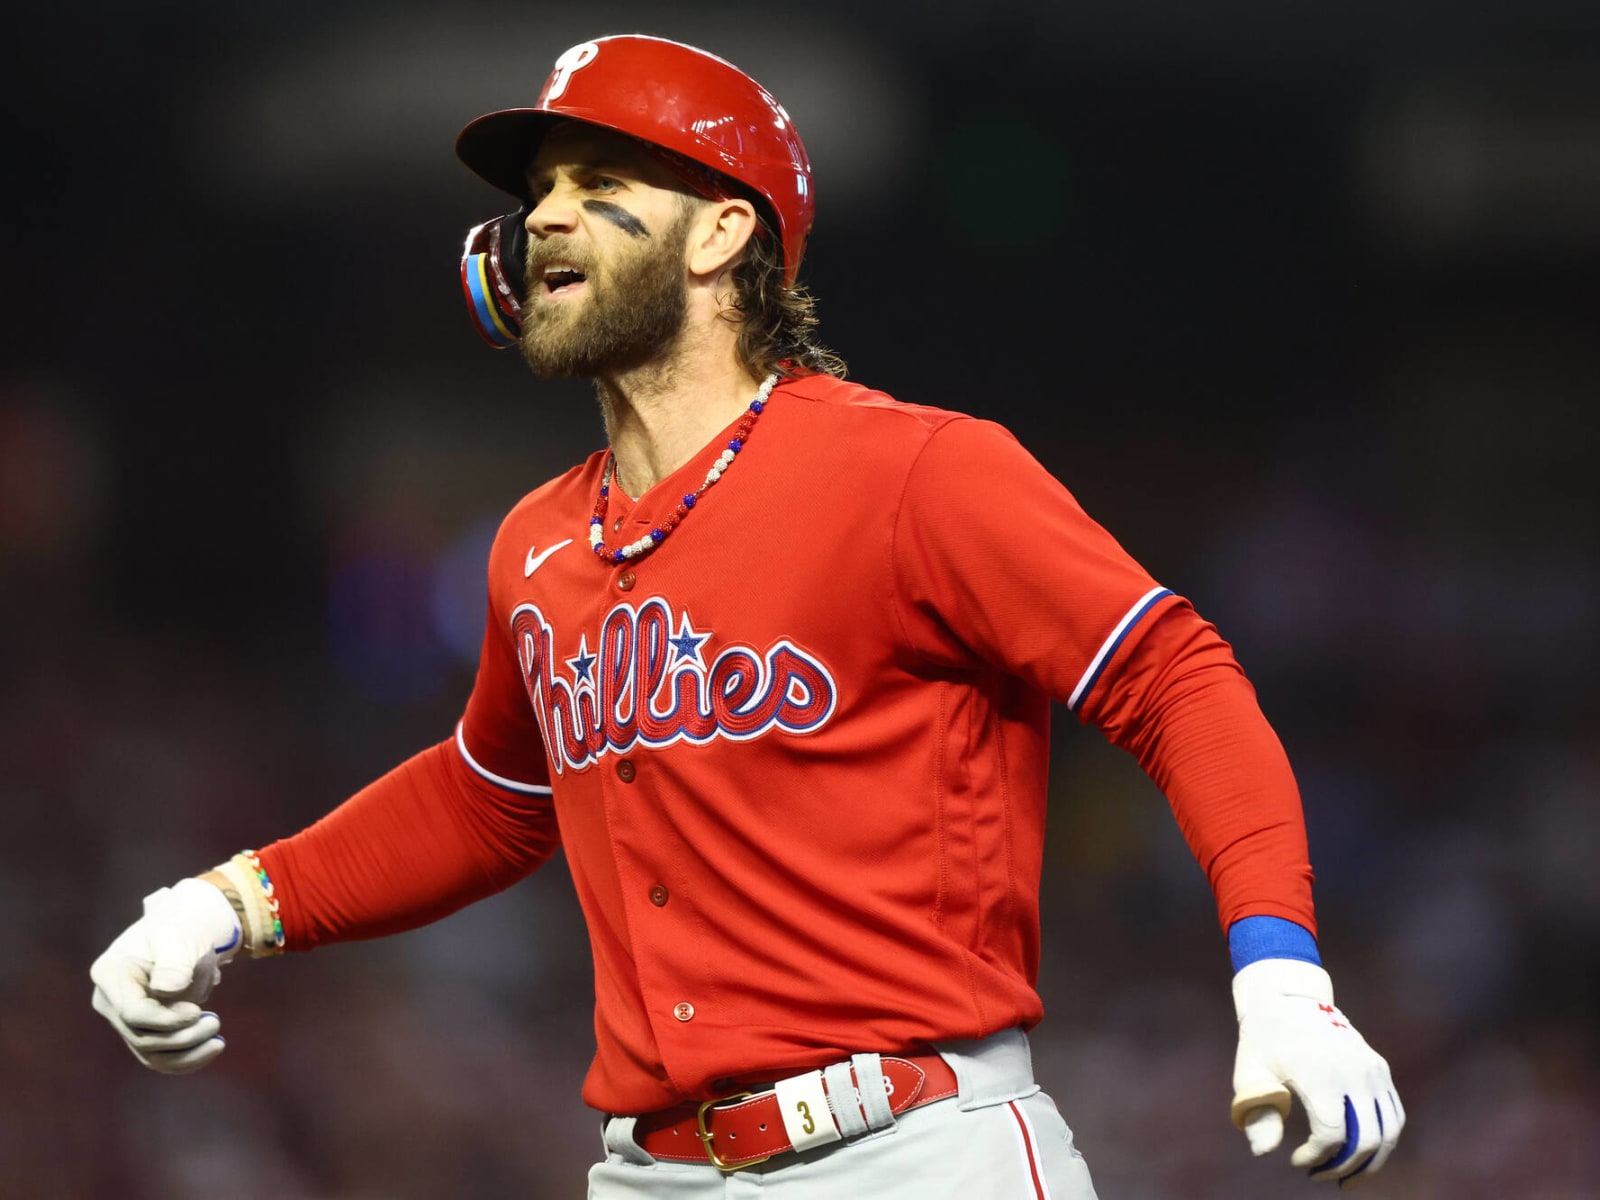 Bryce Harper is officially a historically good postseason hitter